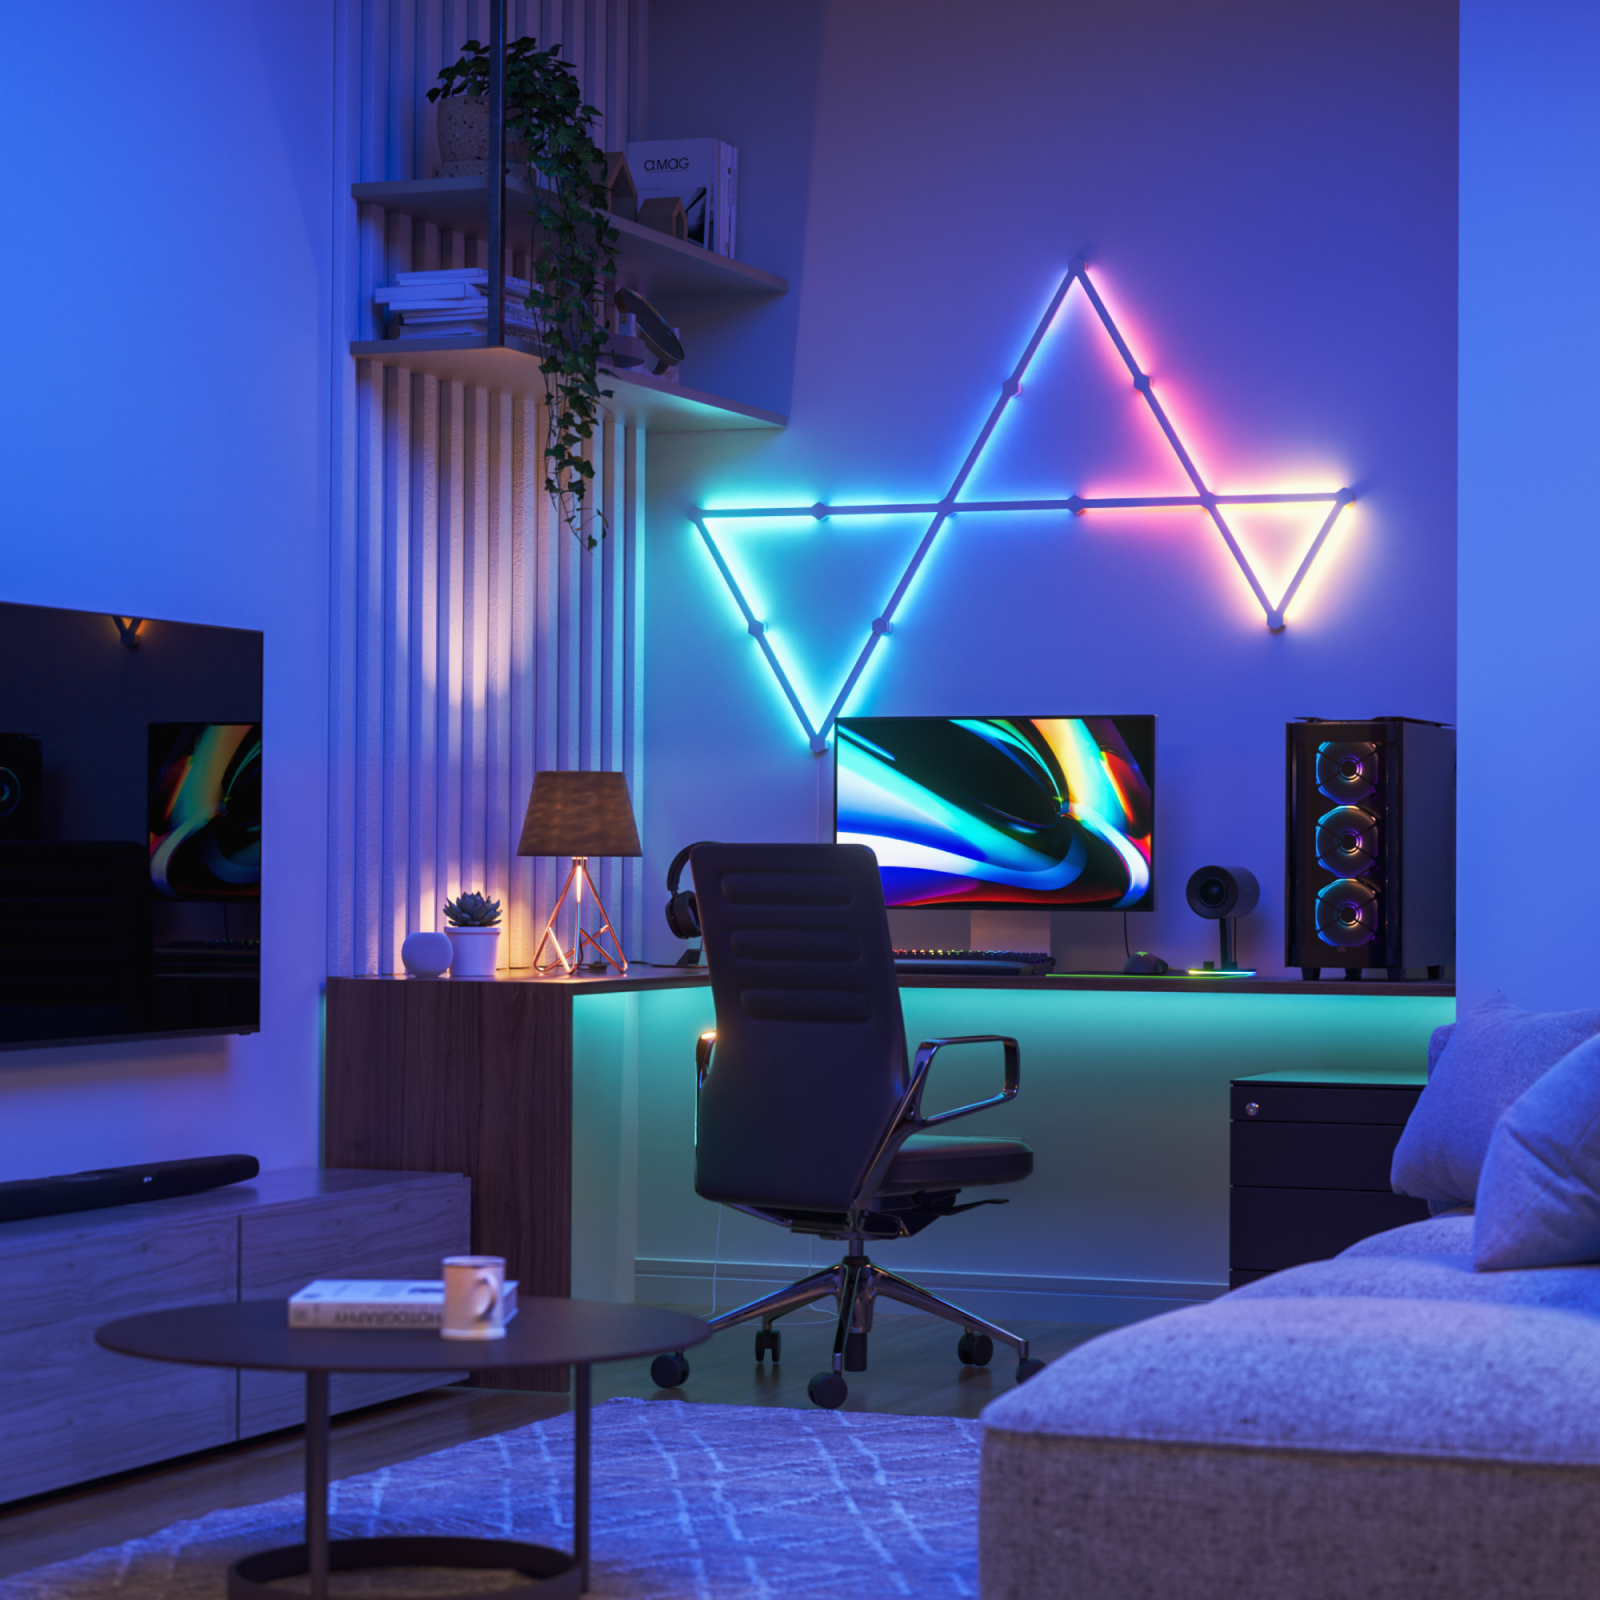 Nanoleaf Lines Thread enabled color changing smart modular backlit light lines. 9 pack. Has expansion pack, flex connector, and skins accessories. HomeKit, Google Assistant, Amazon Alexa, IFTTT.